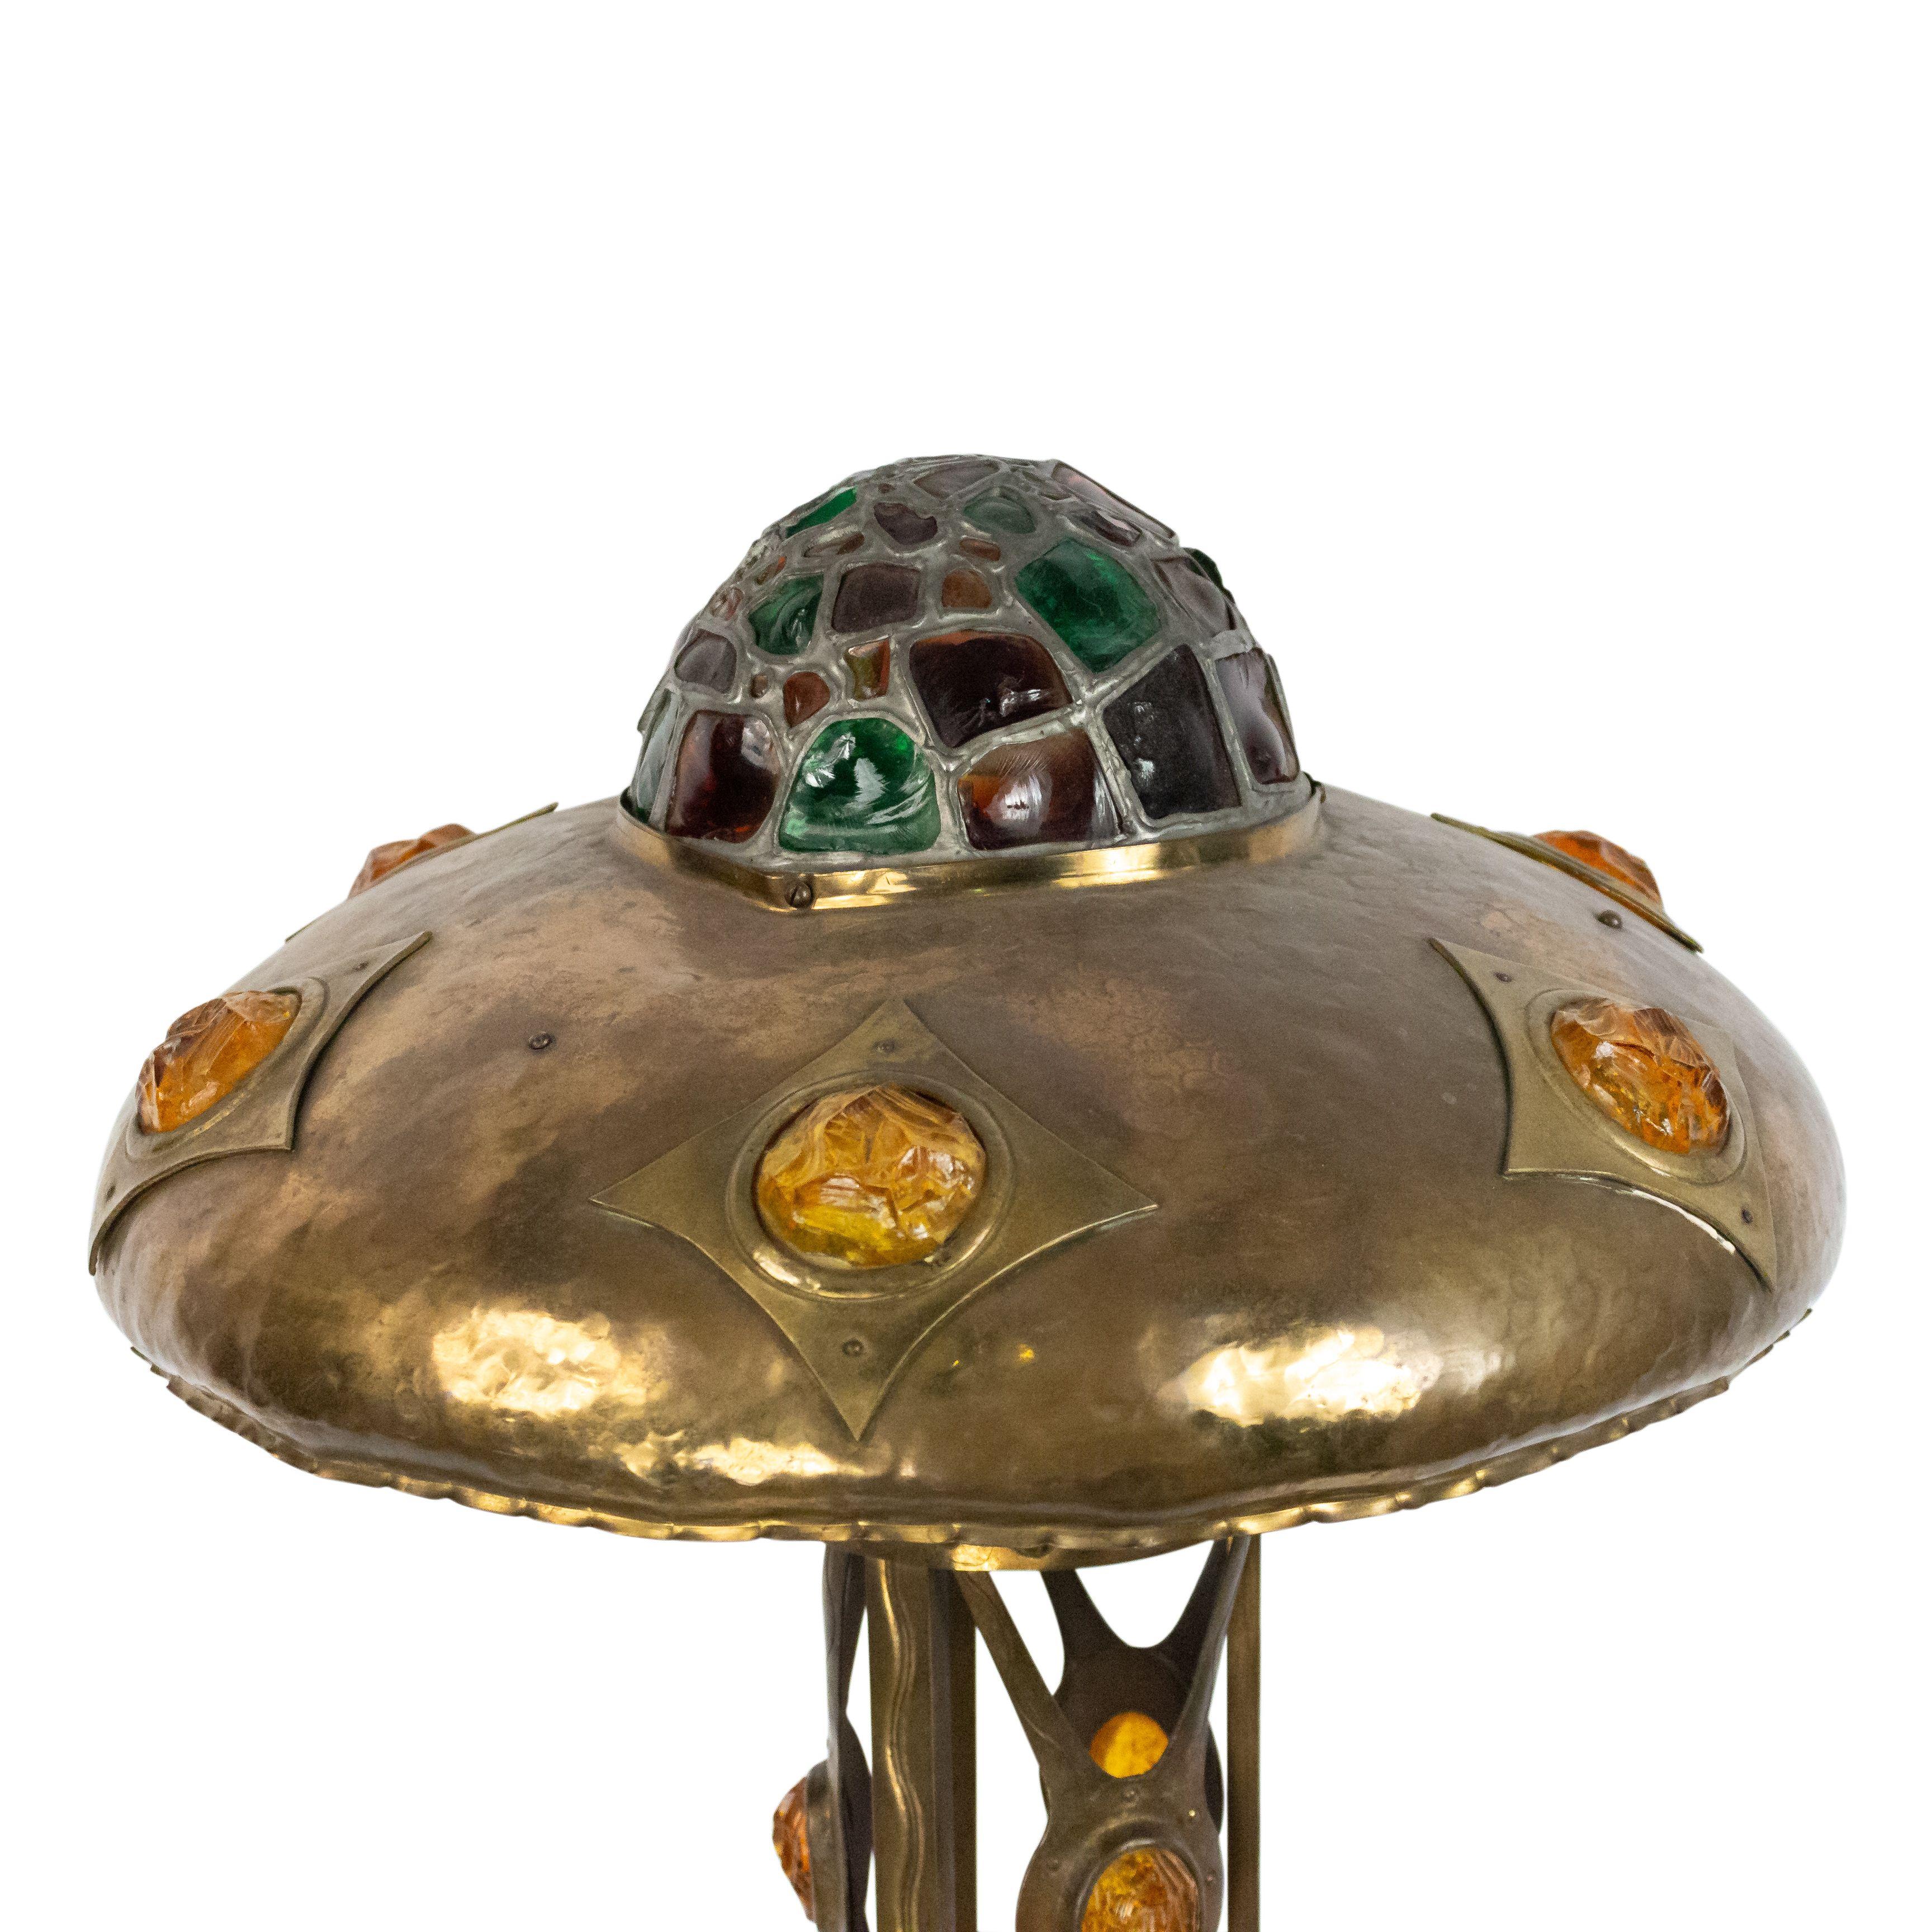 Mission-style hammered brass table lamp with multi-colored slag glass on shade and base.
